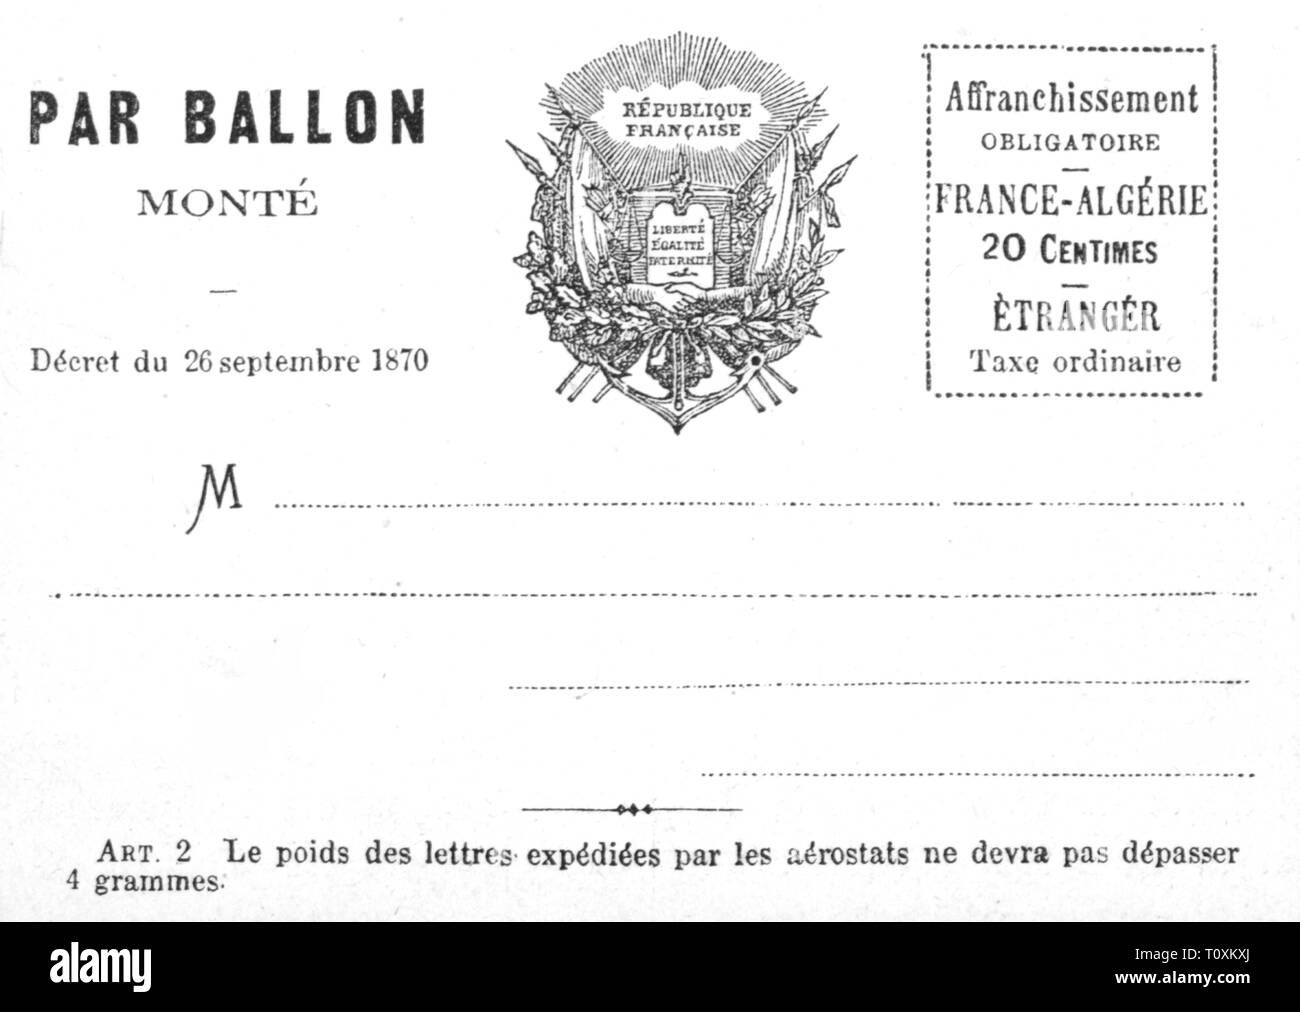 mail, envelope, envelope of the French balloon mail, after the decree of  26.9.1870, obverse, balloons, balloon, airmail, by air-mail,  Franco-Prussian War 1870 - 1871, Franco, Prussian, siege of Paris, , Second  Republic,